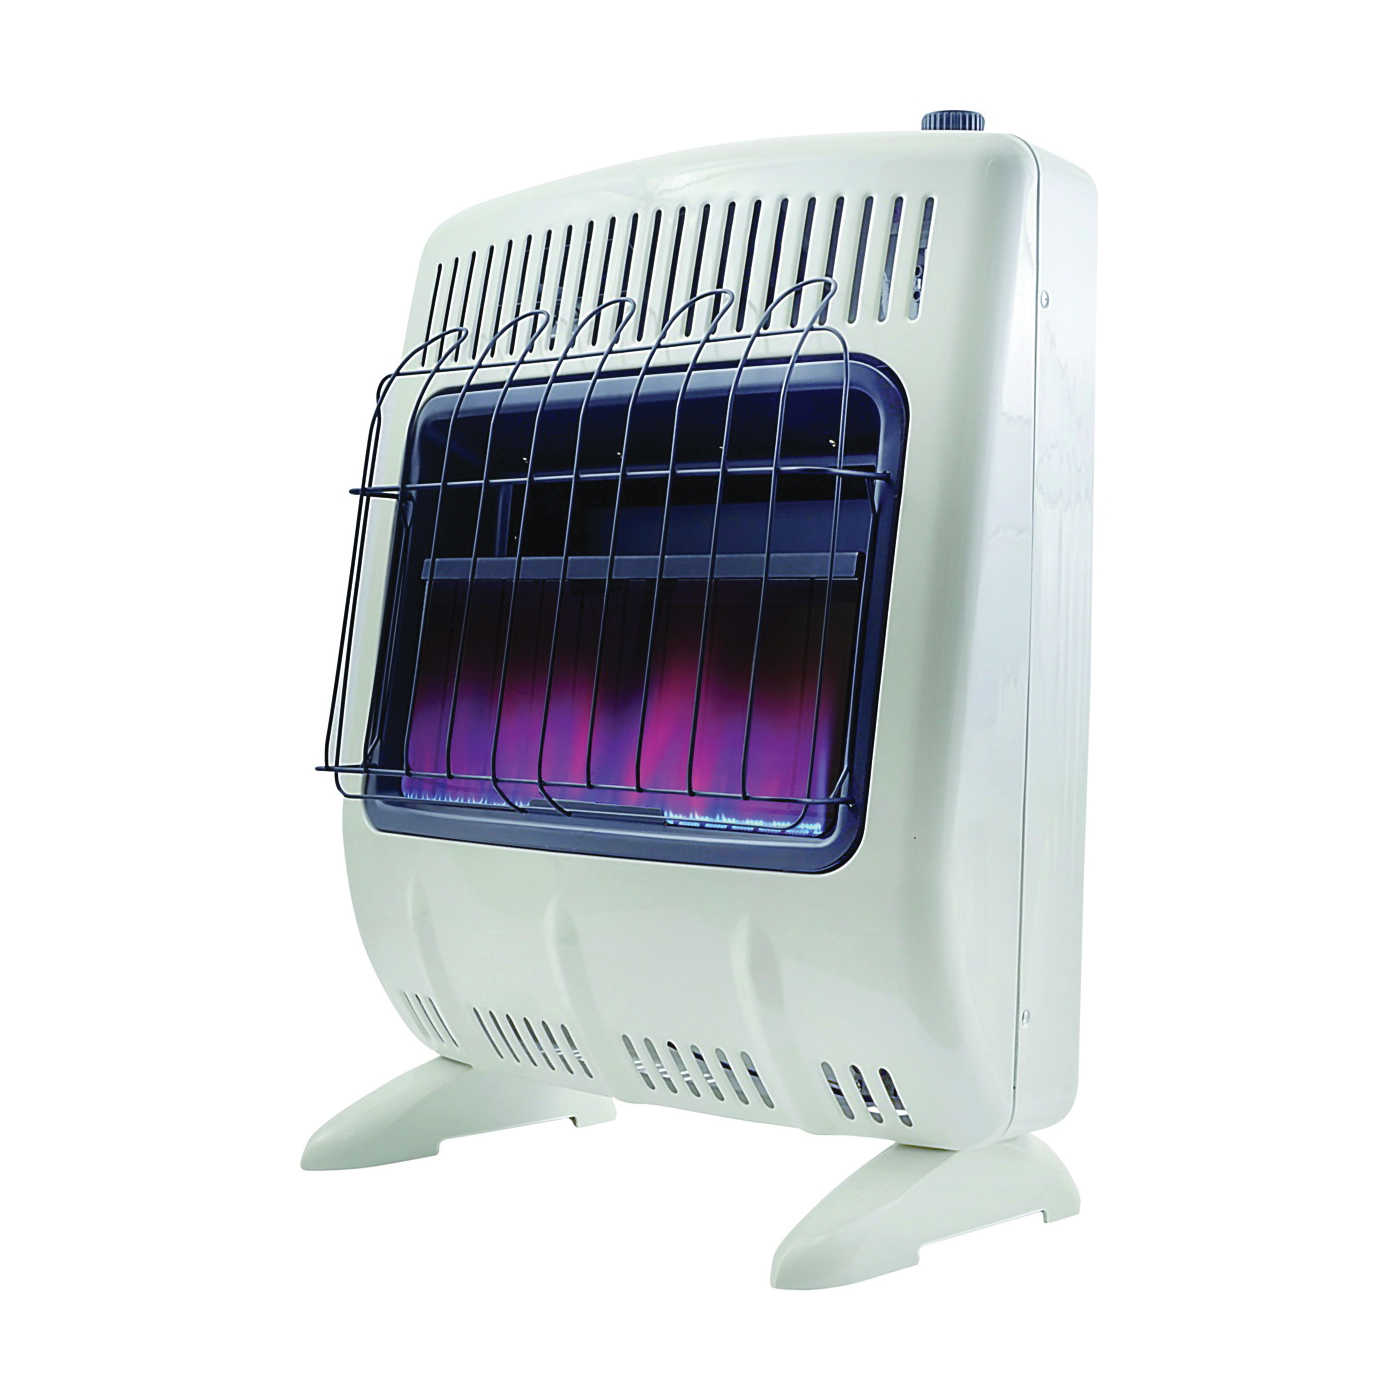 F299721 Vent-Free Blue Flame Gas Heater, Natural Gas, 20000 Btu, 500 sq-ft Heating Area